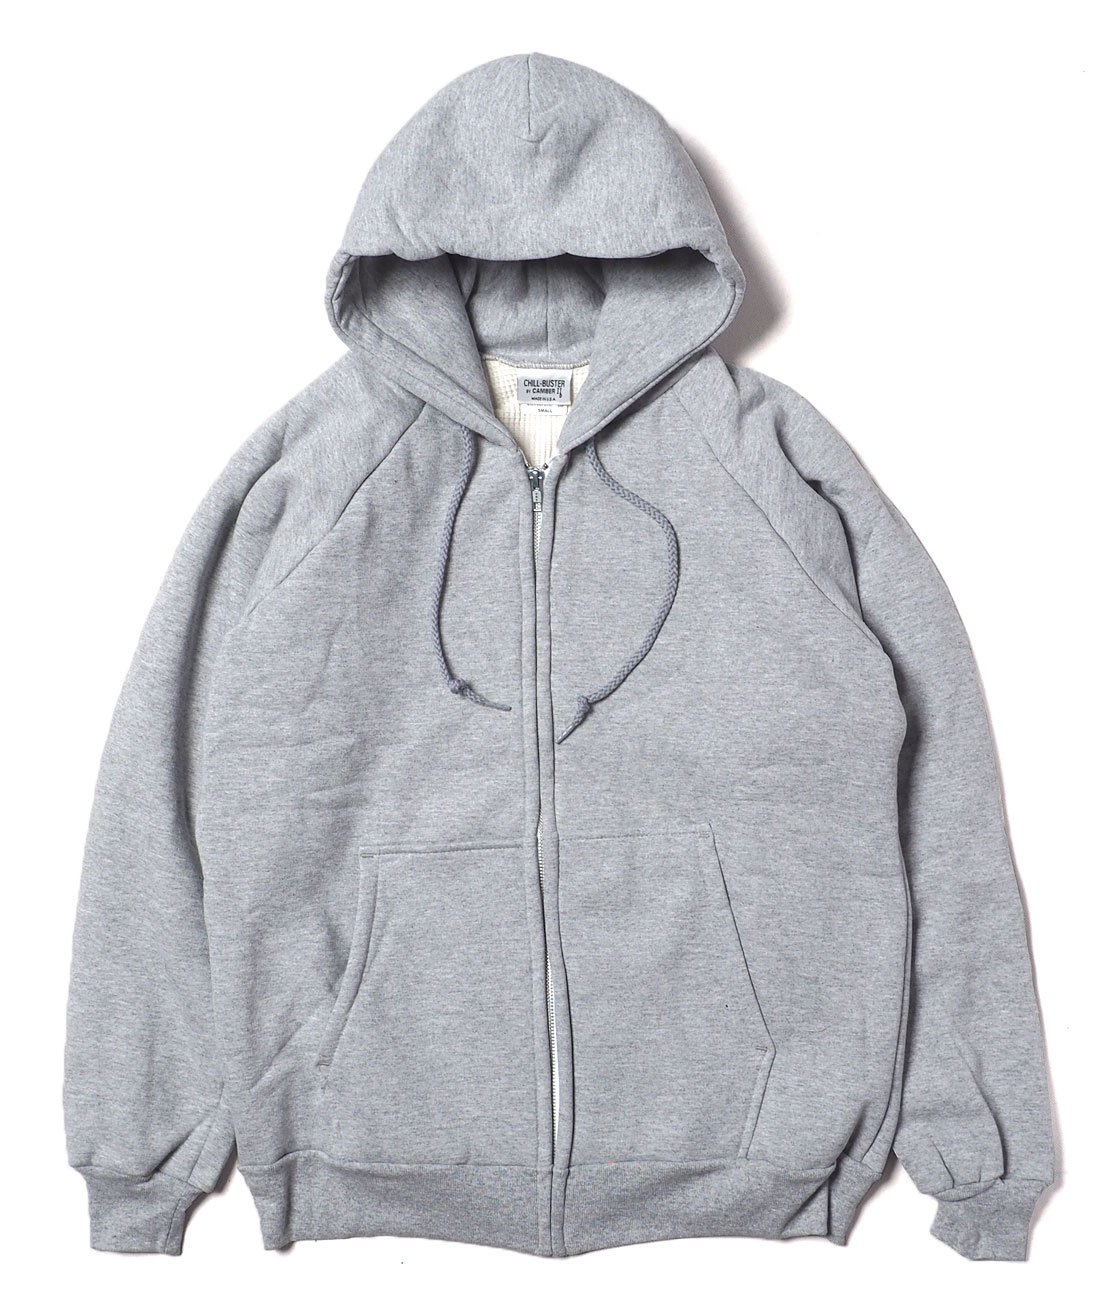 CAMBER】#531 ZIP HOODED CHILL BUSTER - GREY ジップパーカー 14